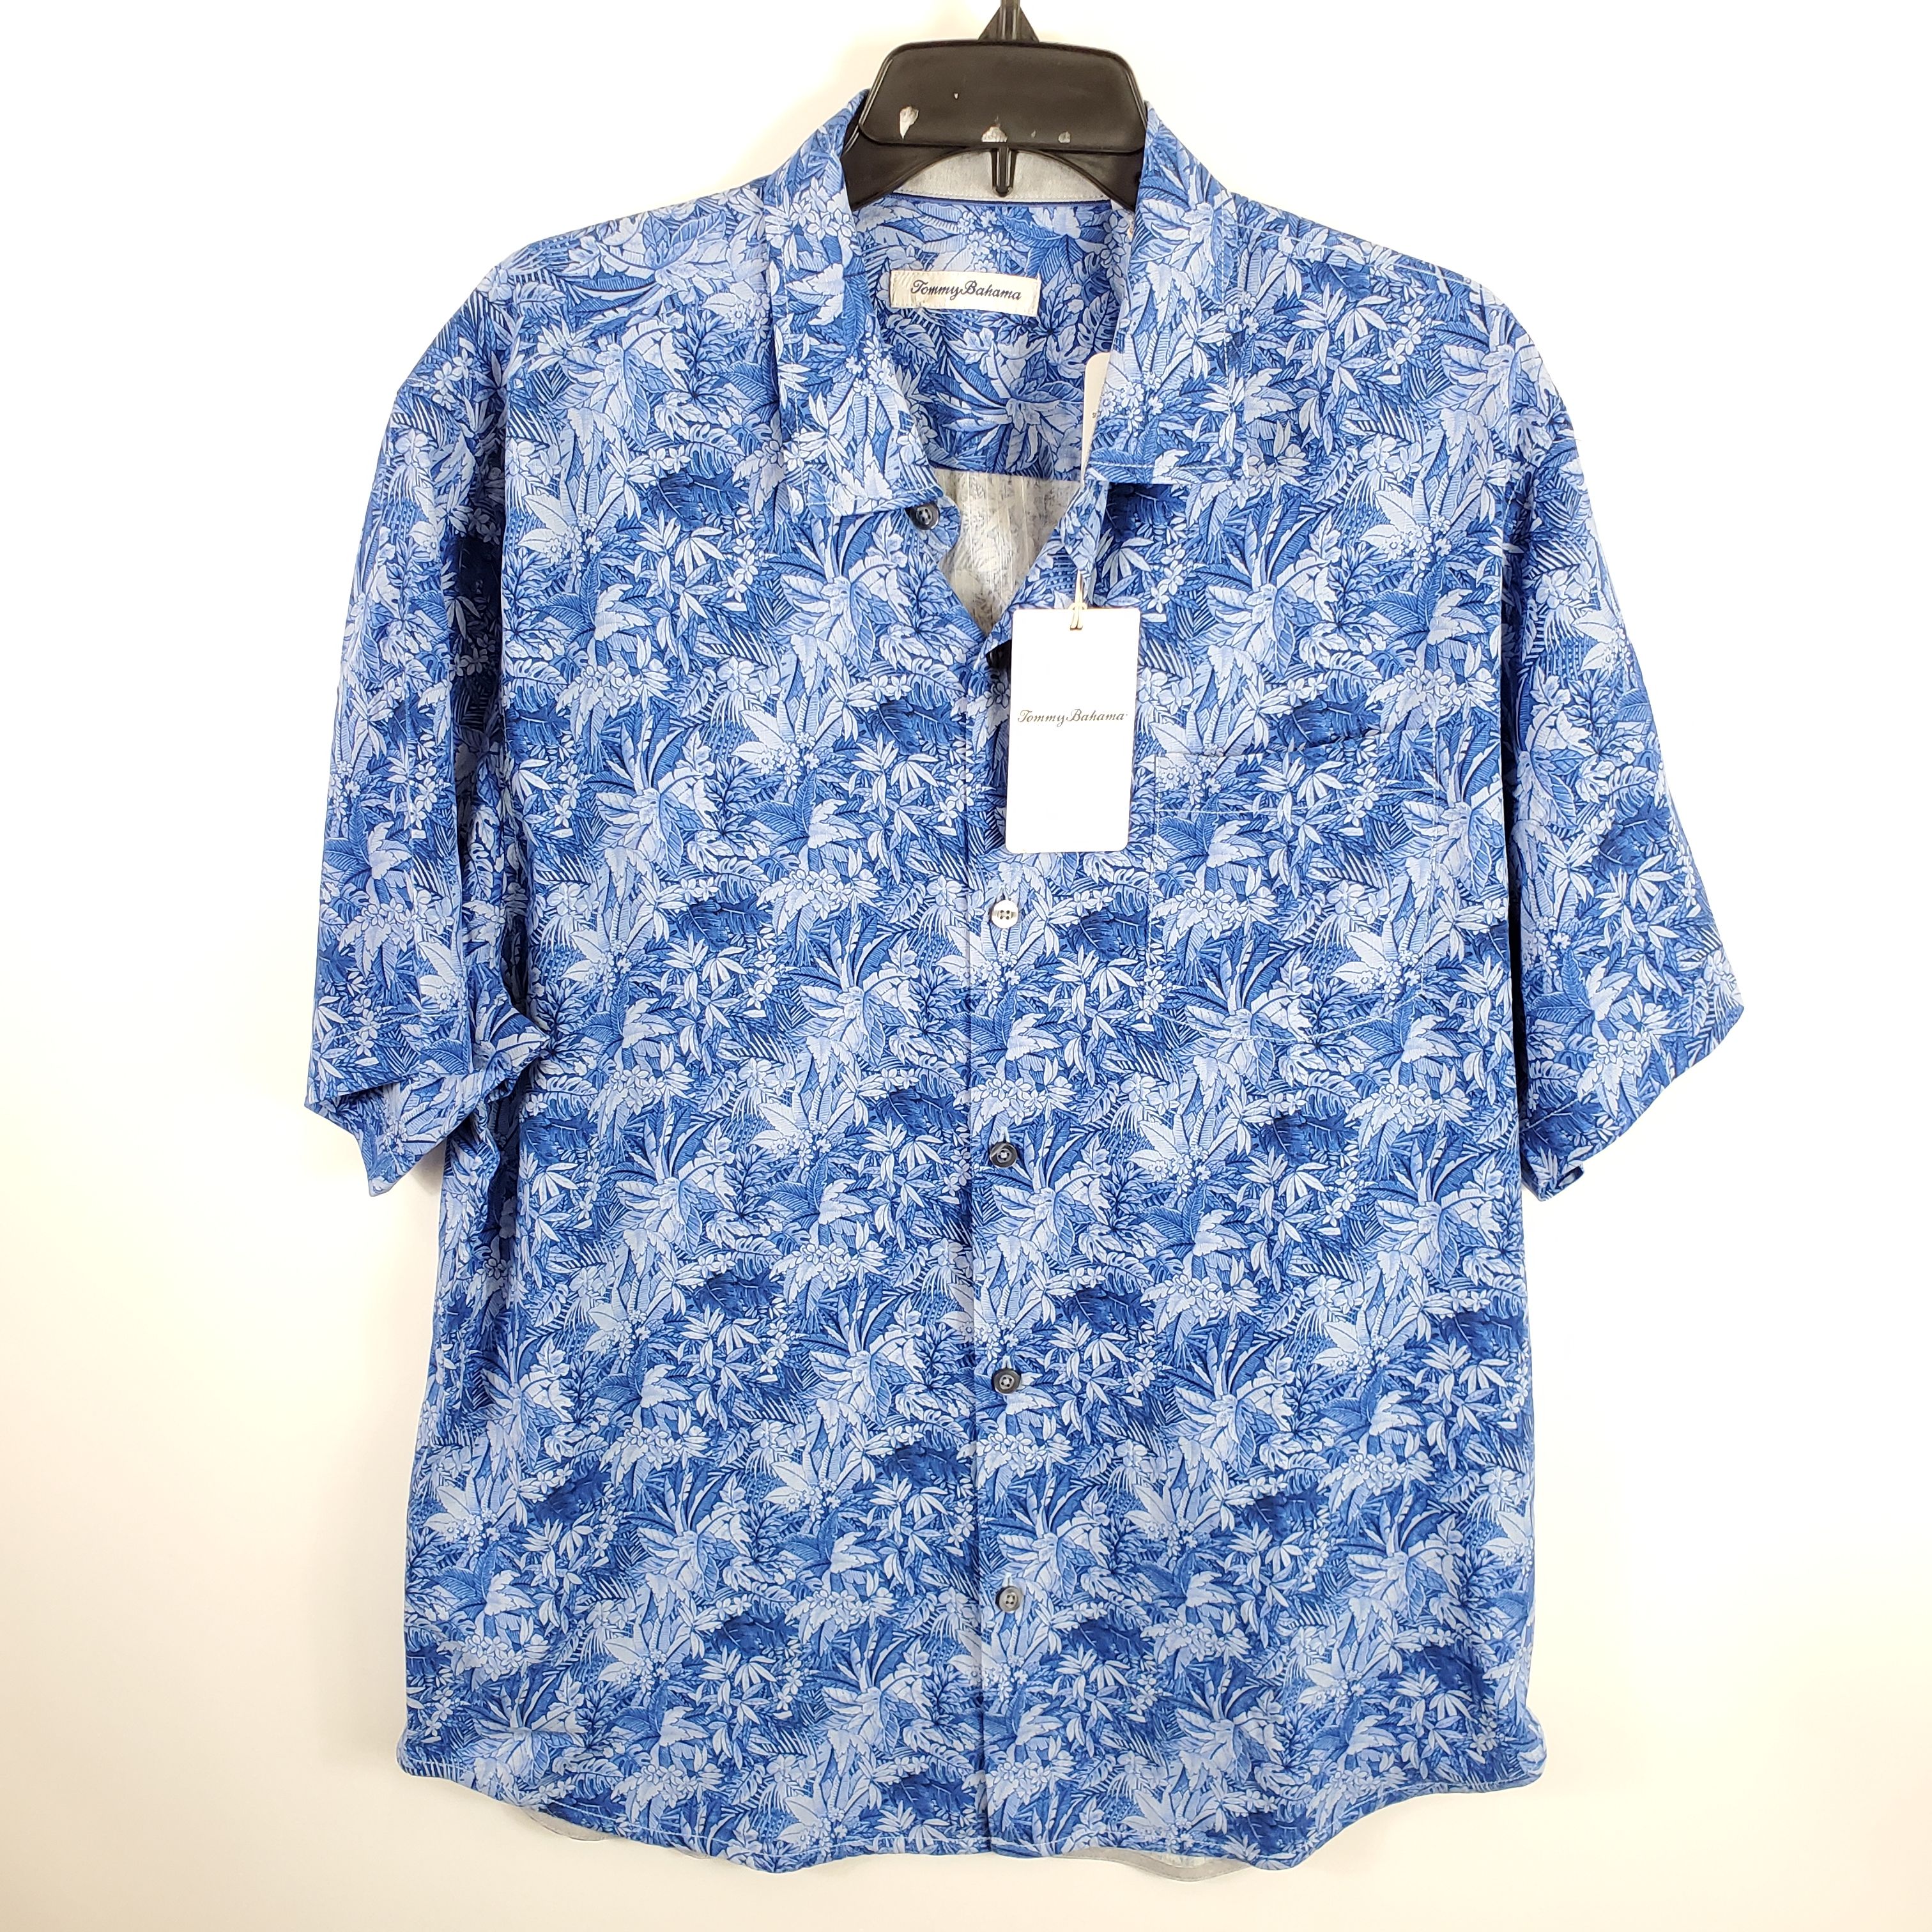 Wholesale Tommy Bahama Shirt To Look Sharp For Any Occasion 